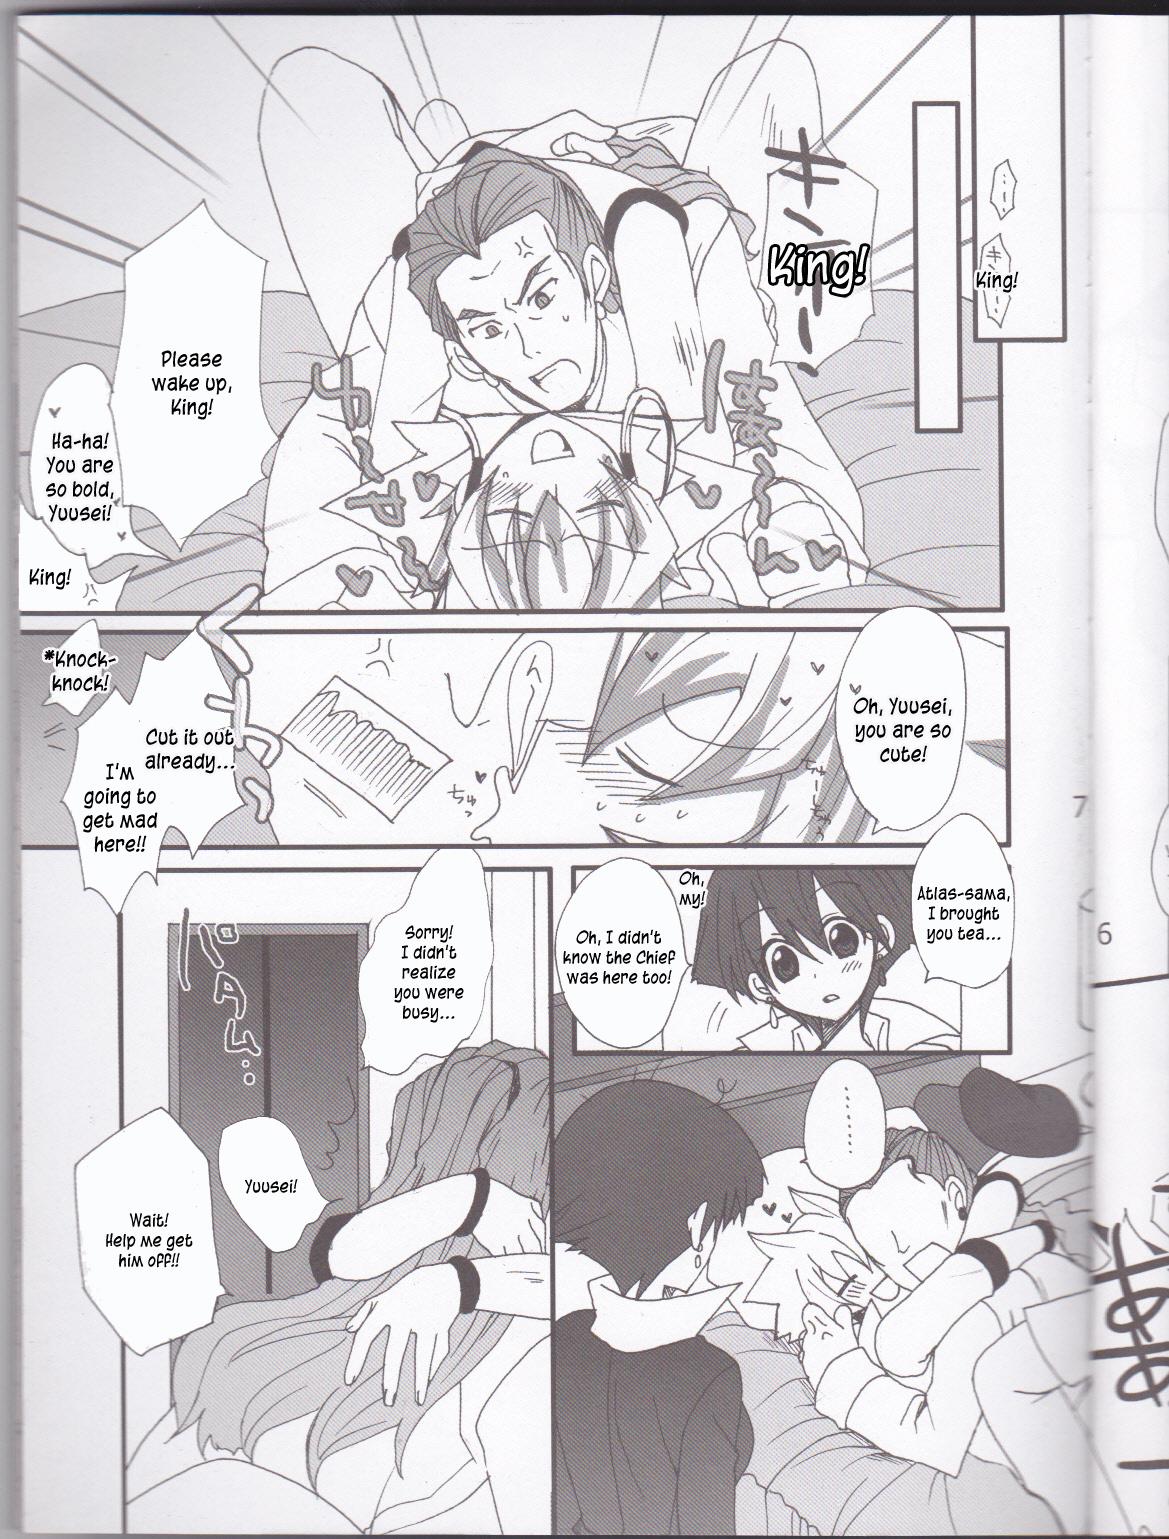 Flexible Angura - Yu-gi-oh 5ds For - Page 8